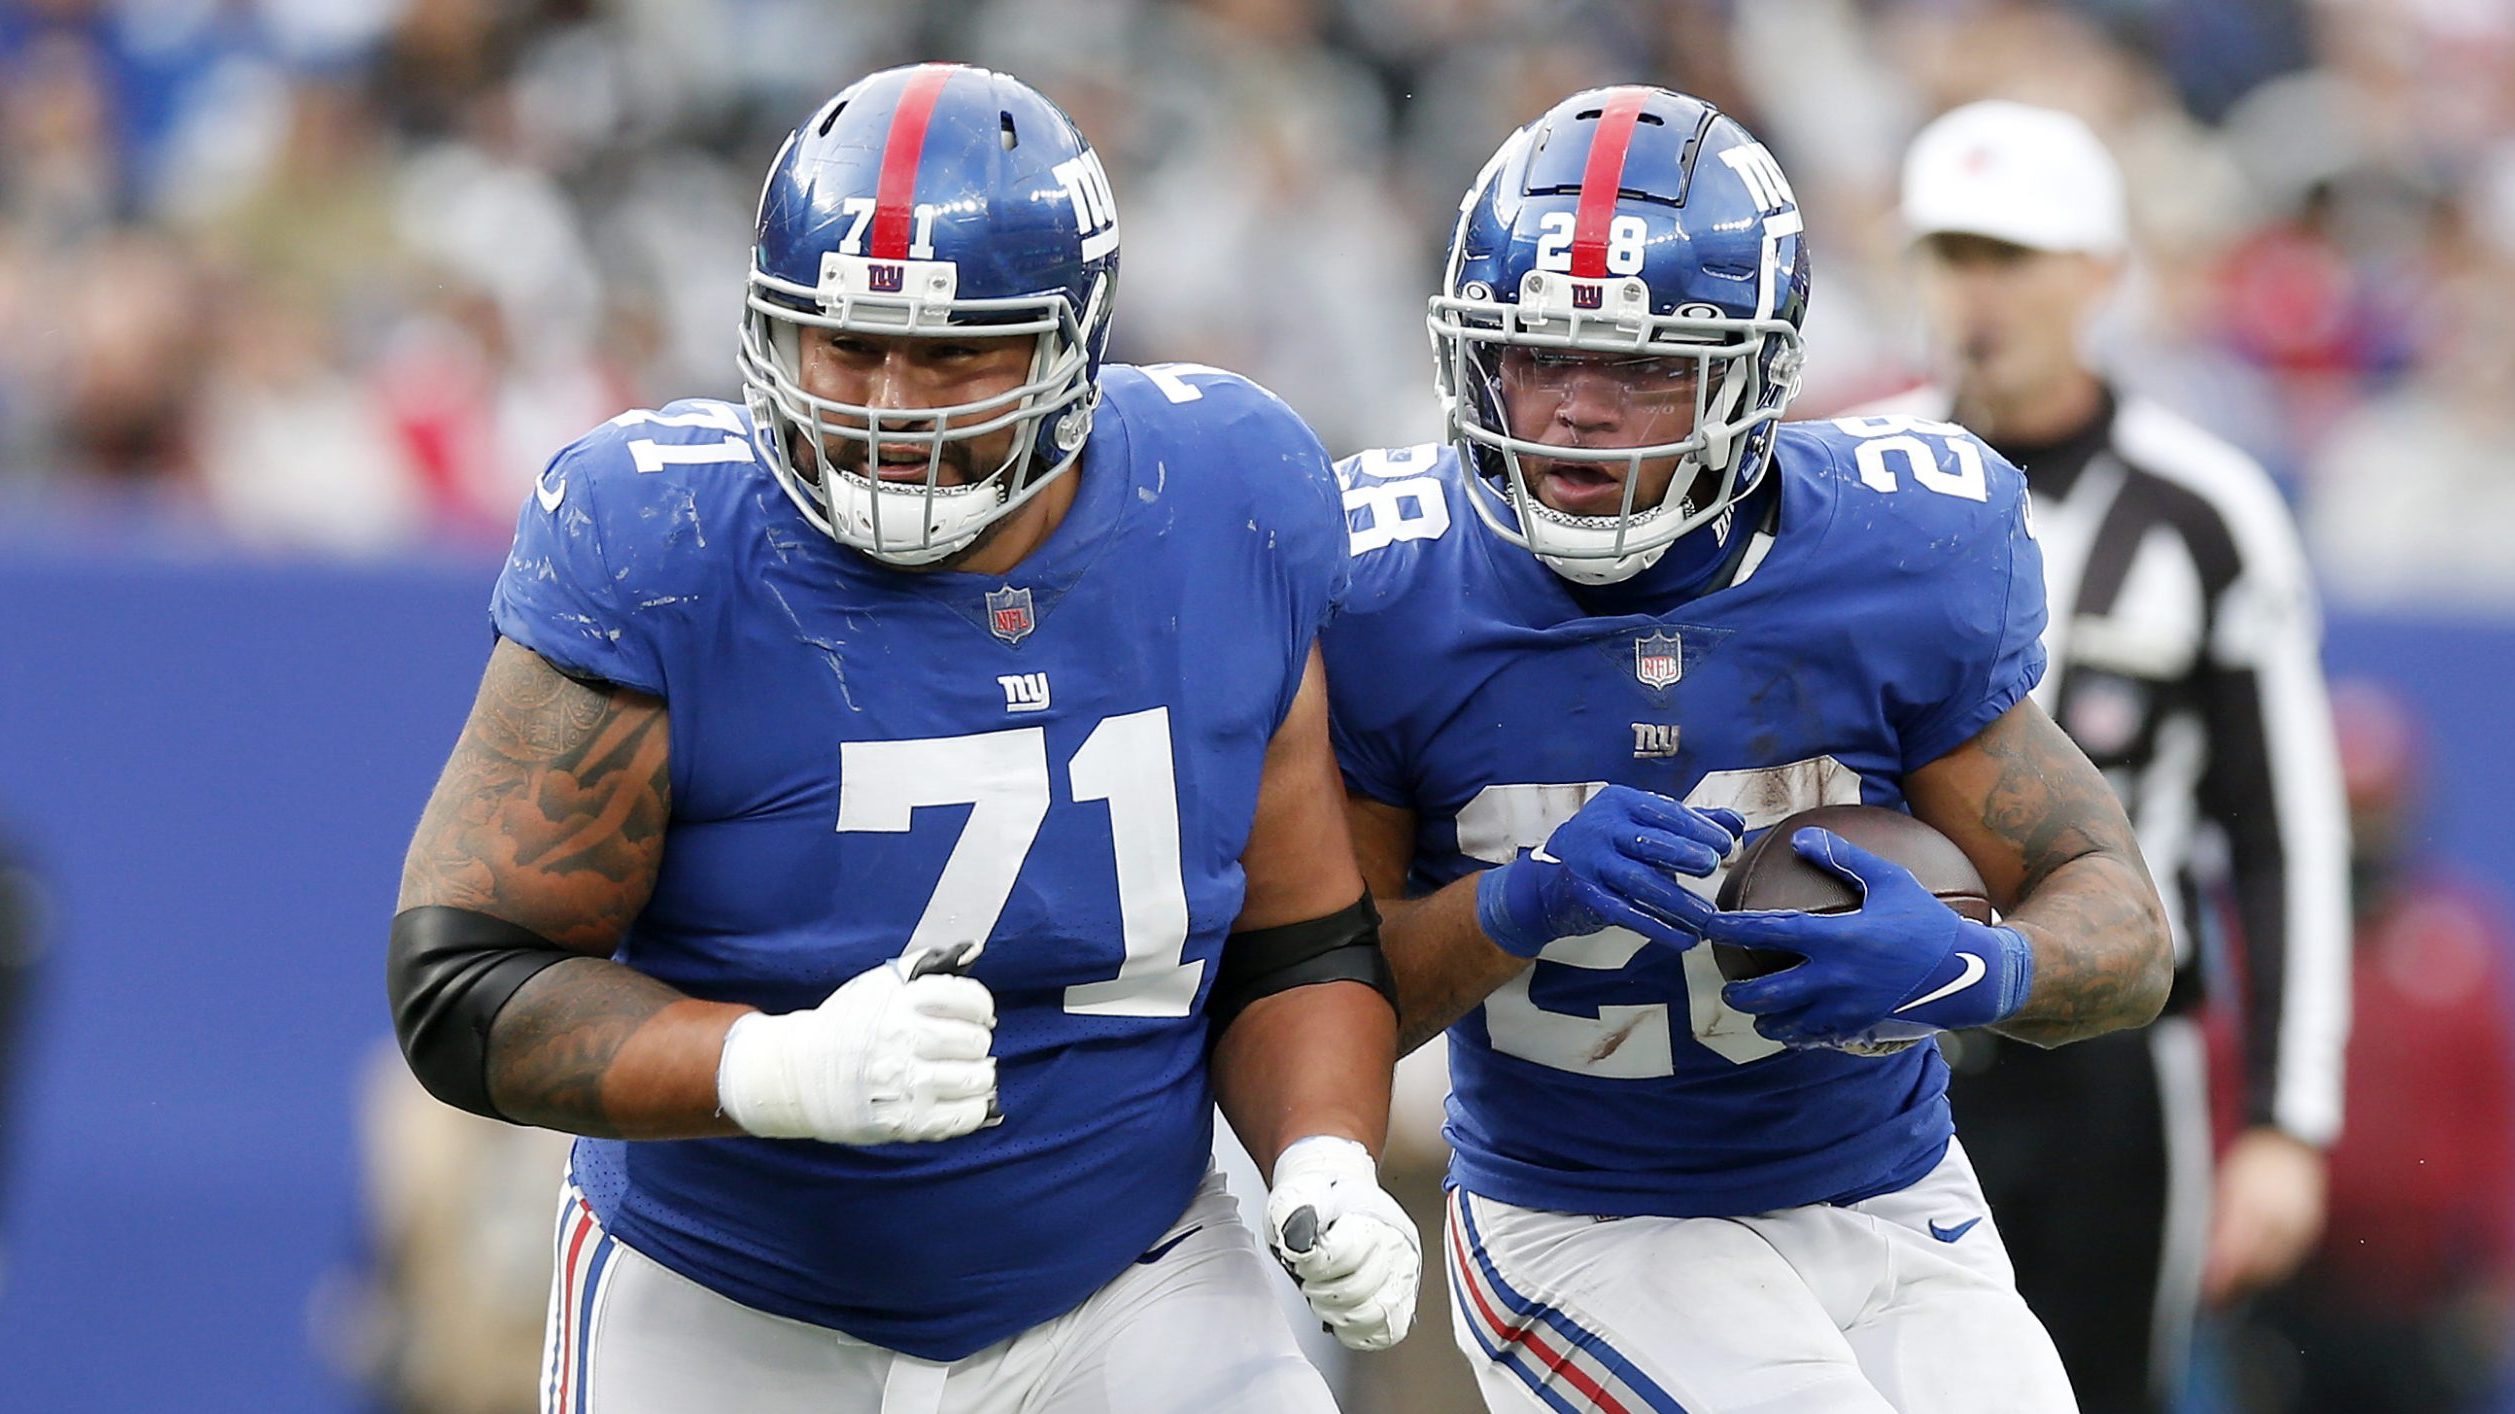 Will Hernandez #71 and Devontae Booker #28 of the New York Giants in action against the Las Vegas R...